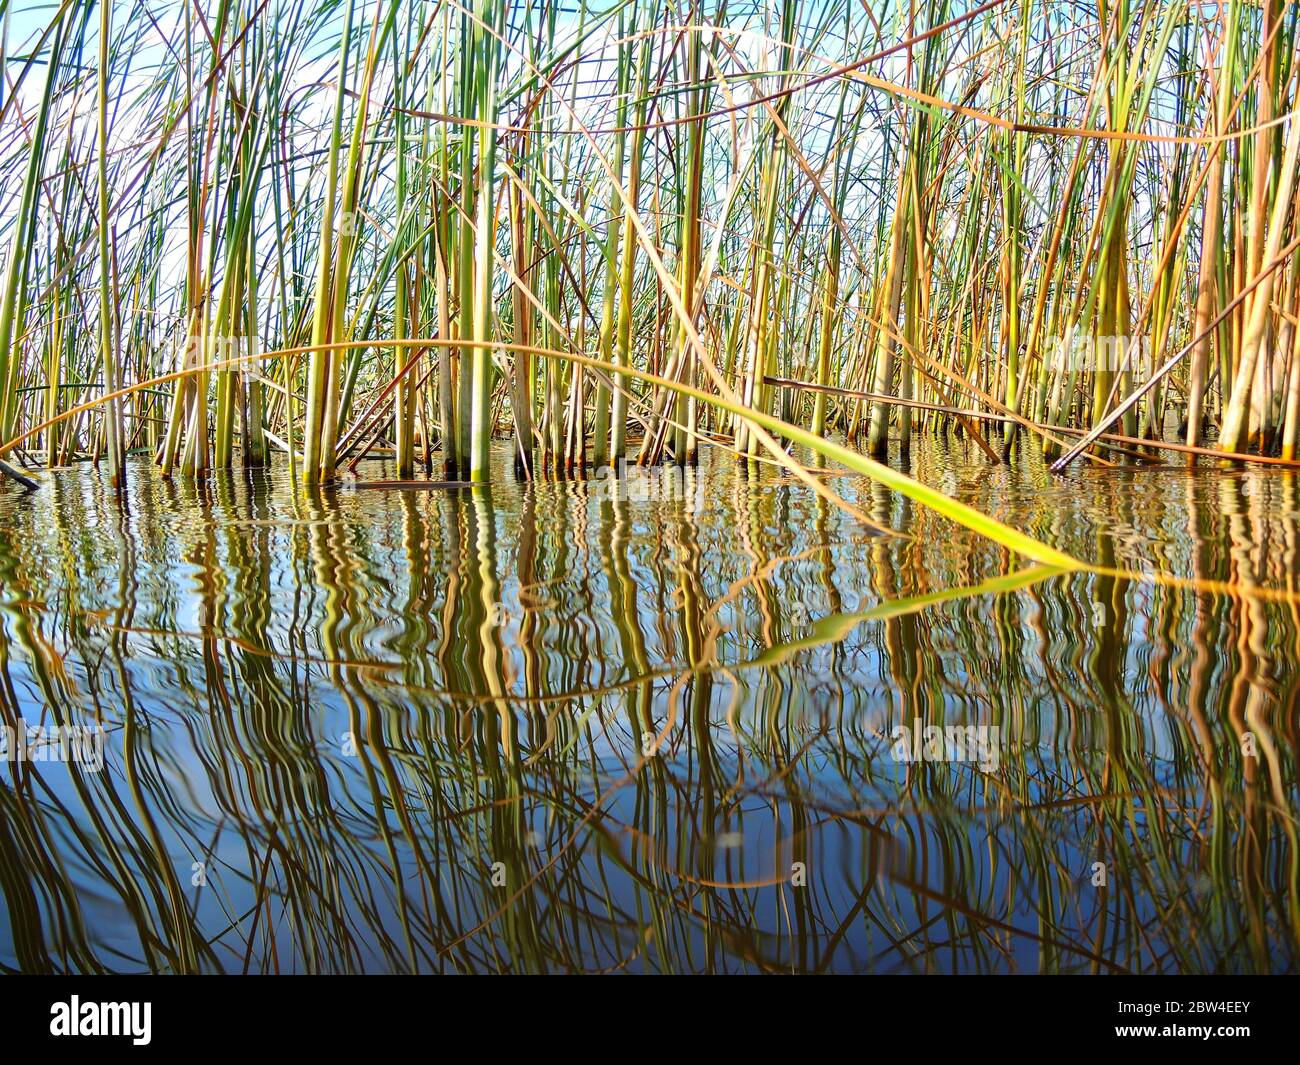 Nature at a lake - calm water and green reeds reflecting in the foreground. Stock Photo